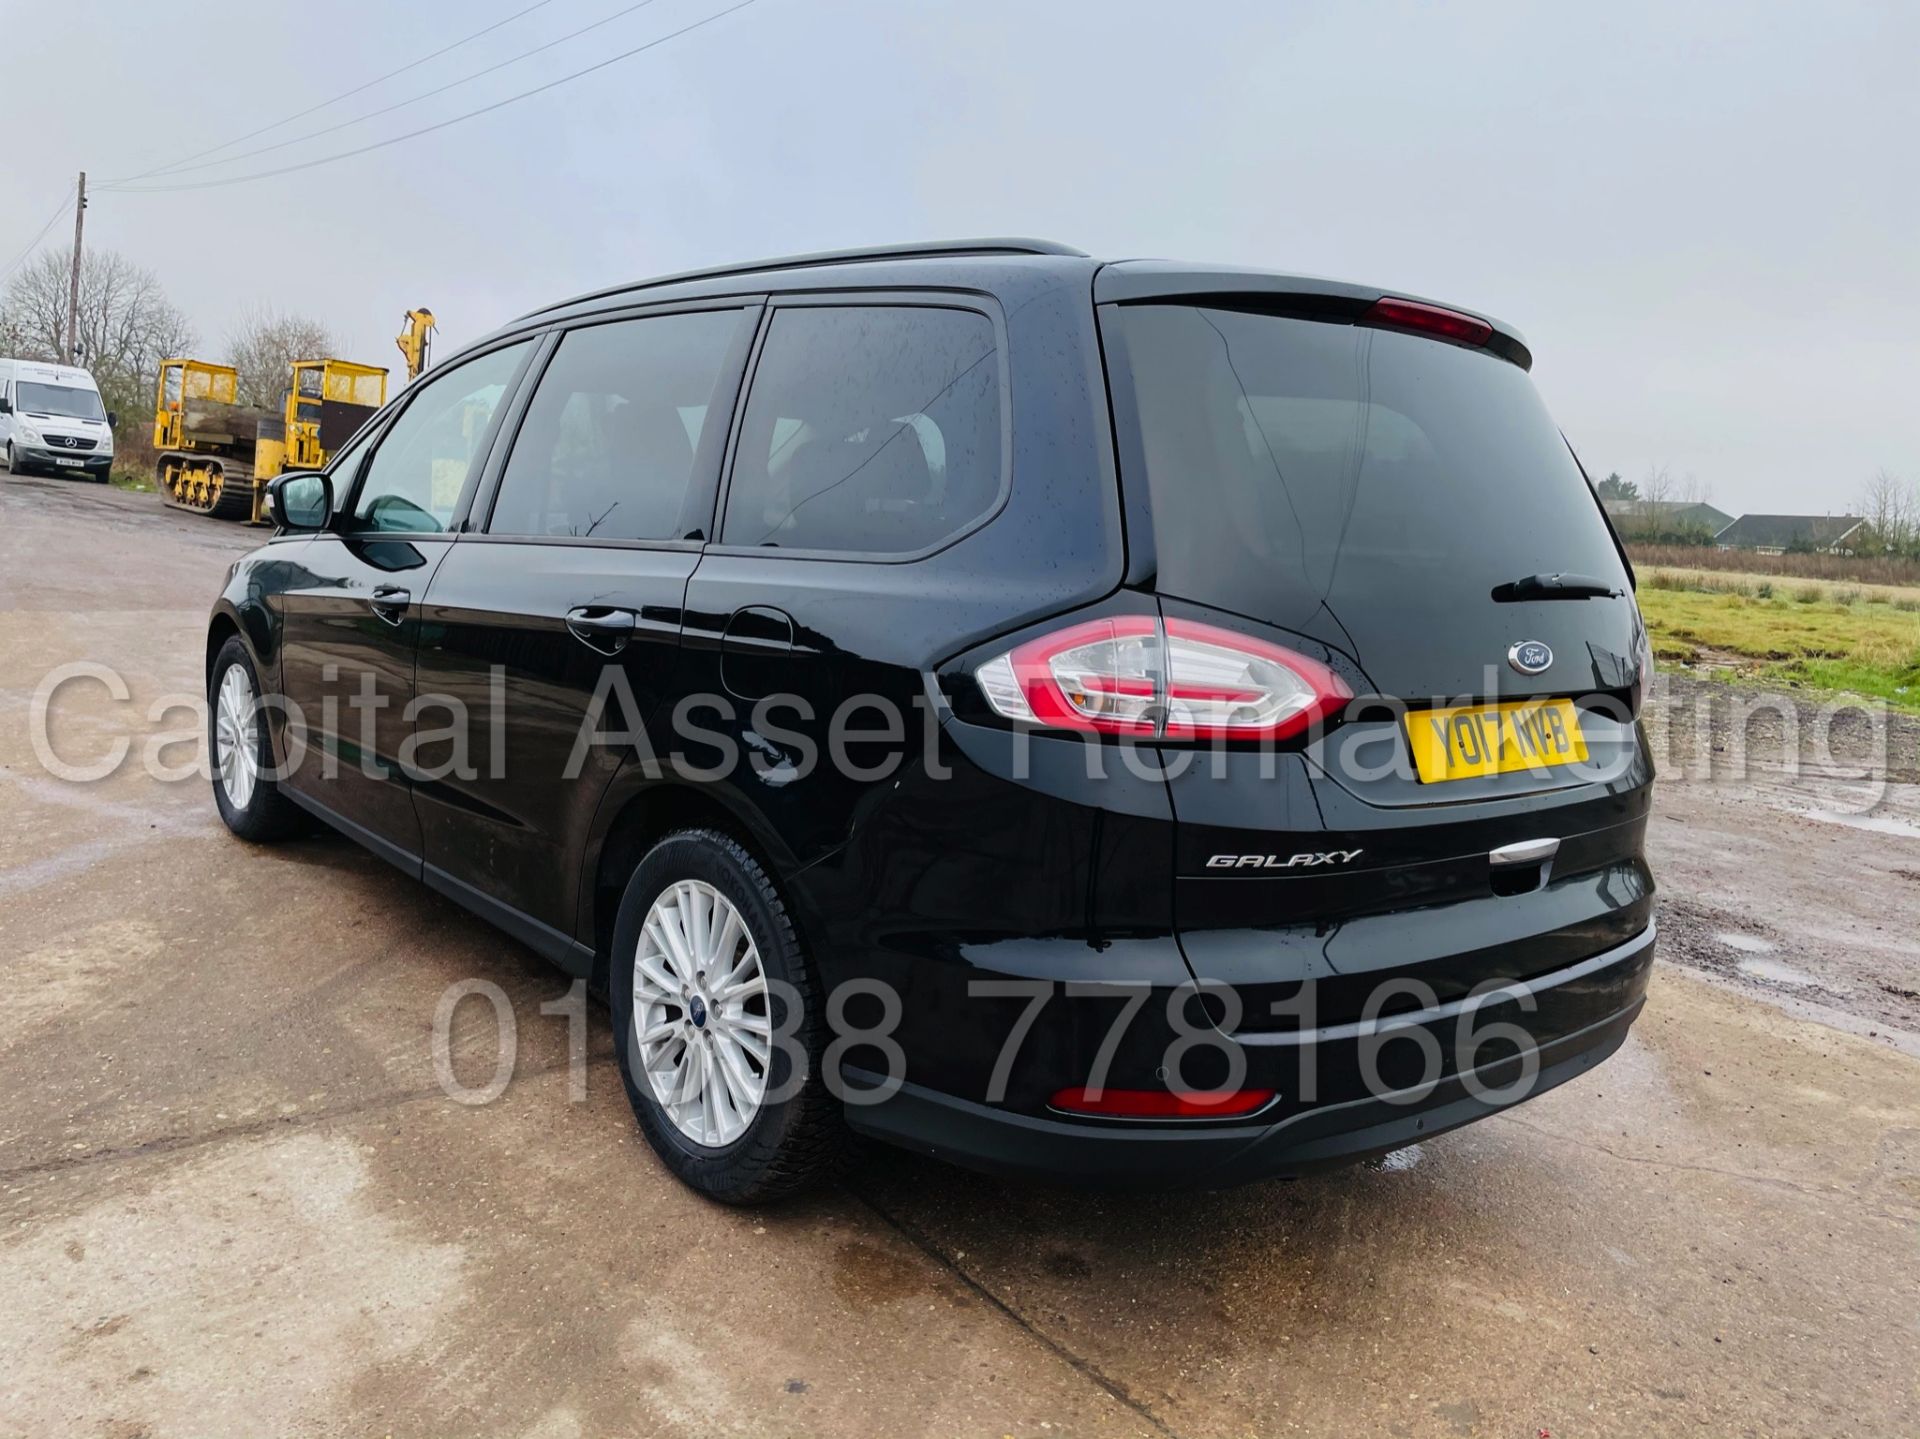 (ON SALE) FORD GALAXY *ZETEC EDITION* 7 SEATER MPV (2017 - EURO 6) '2.0 TDCI - AUTO' (1 OWNER) - Image 6 of 48